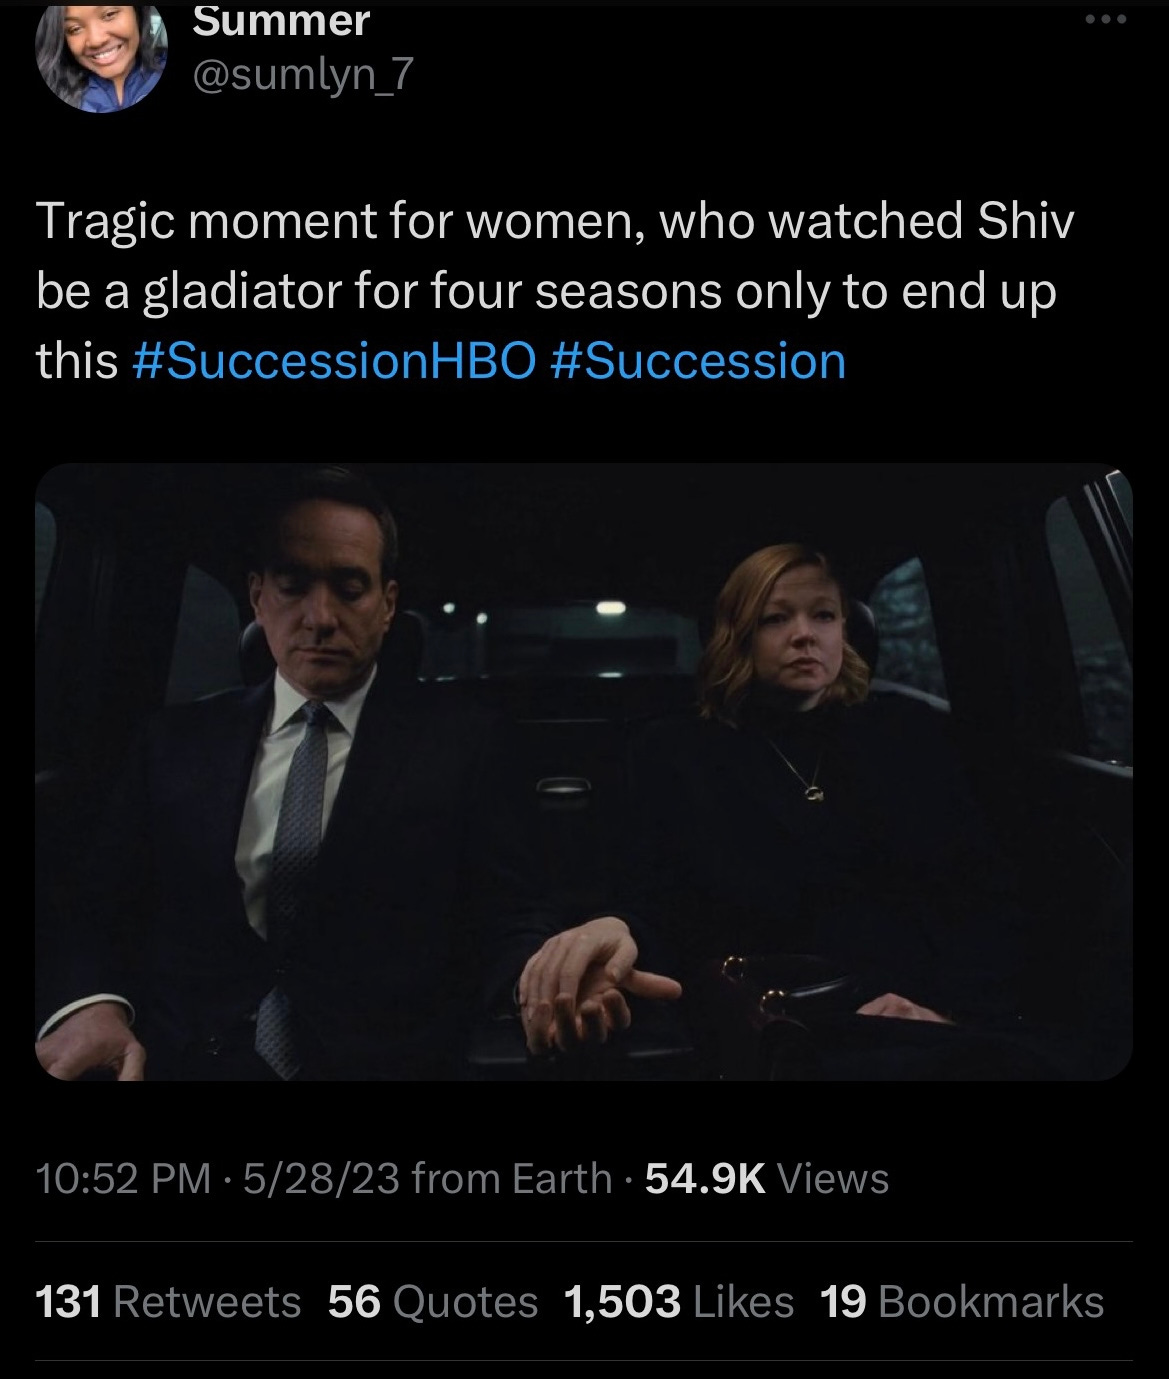 Tweet: tragic moment for women, who watched Shiv be a gladiator for four seasons only to end up this #SuccessionHBO. The photo is of Tom and Shiv barely holding hands and avoiding eye contact with each other at the end of the series finale.